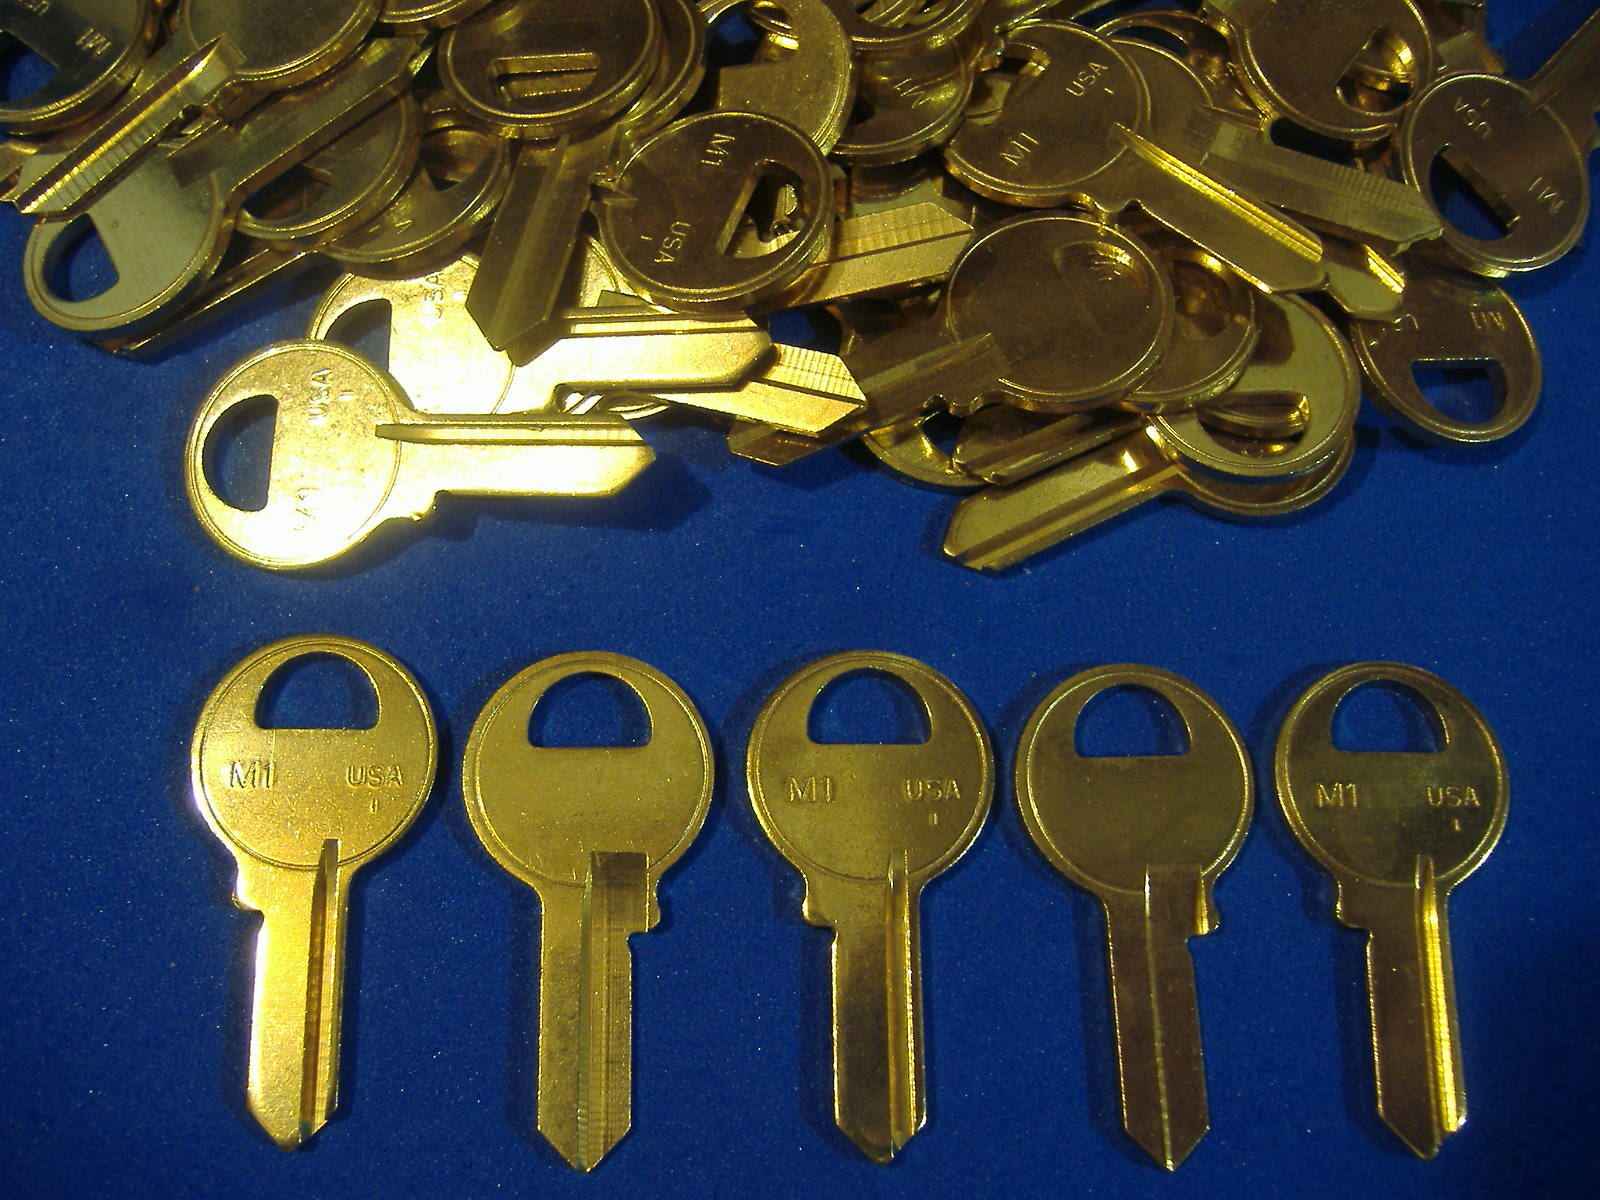 LOT OF FIFTY LOCKSMITH M1 KEY BLANKS FITS MASTER BRASS  MADE IN USA 